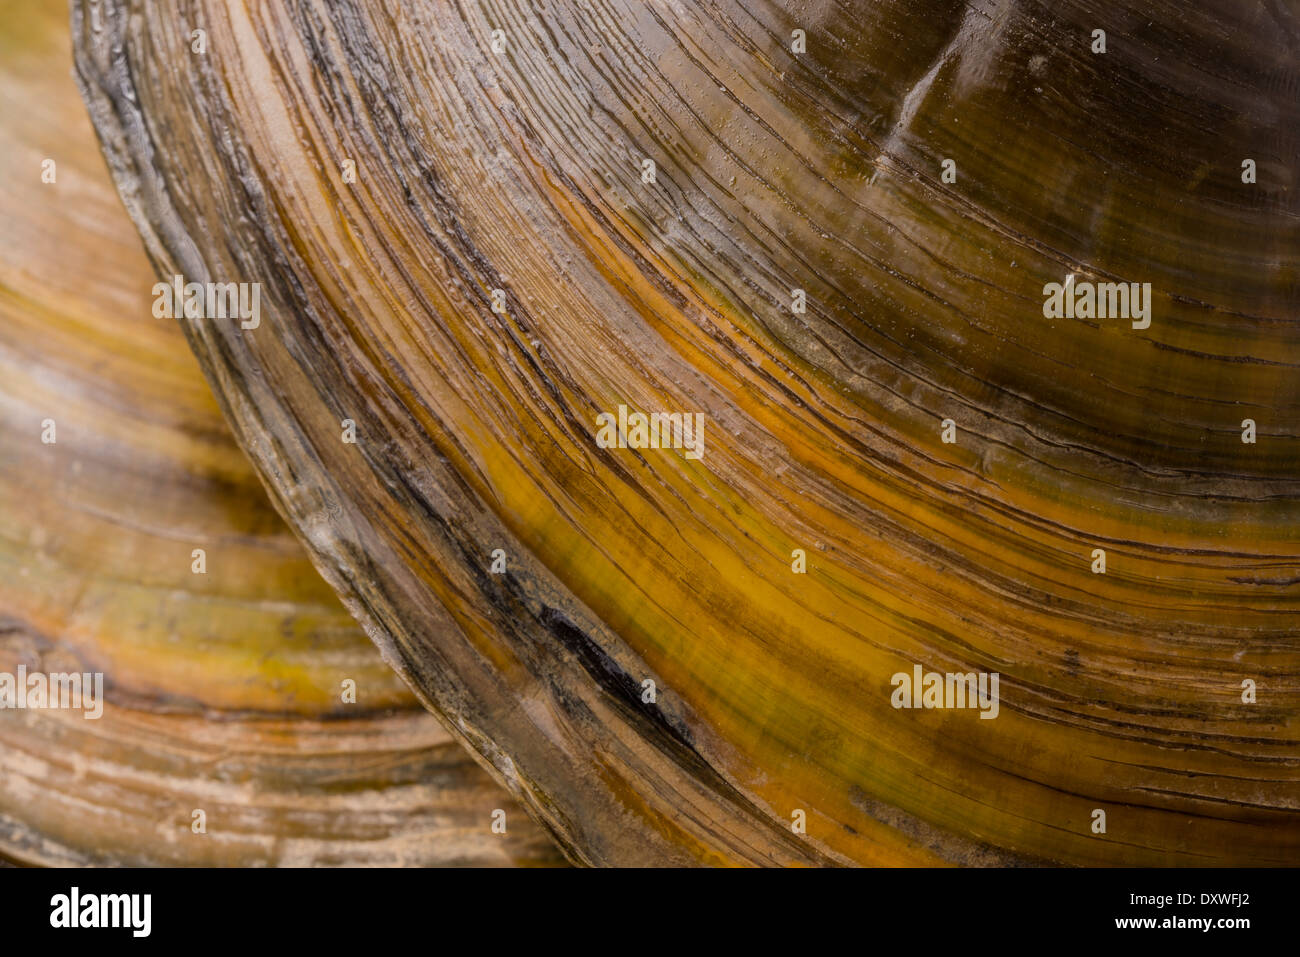 Chinese Pond Mussel (Sinanodonta woodiana), large freshwater mussel which is an invasive species to Europe, Spain. Growth marks in outer shell. Stock Photo